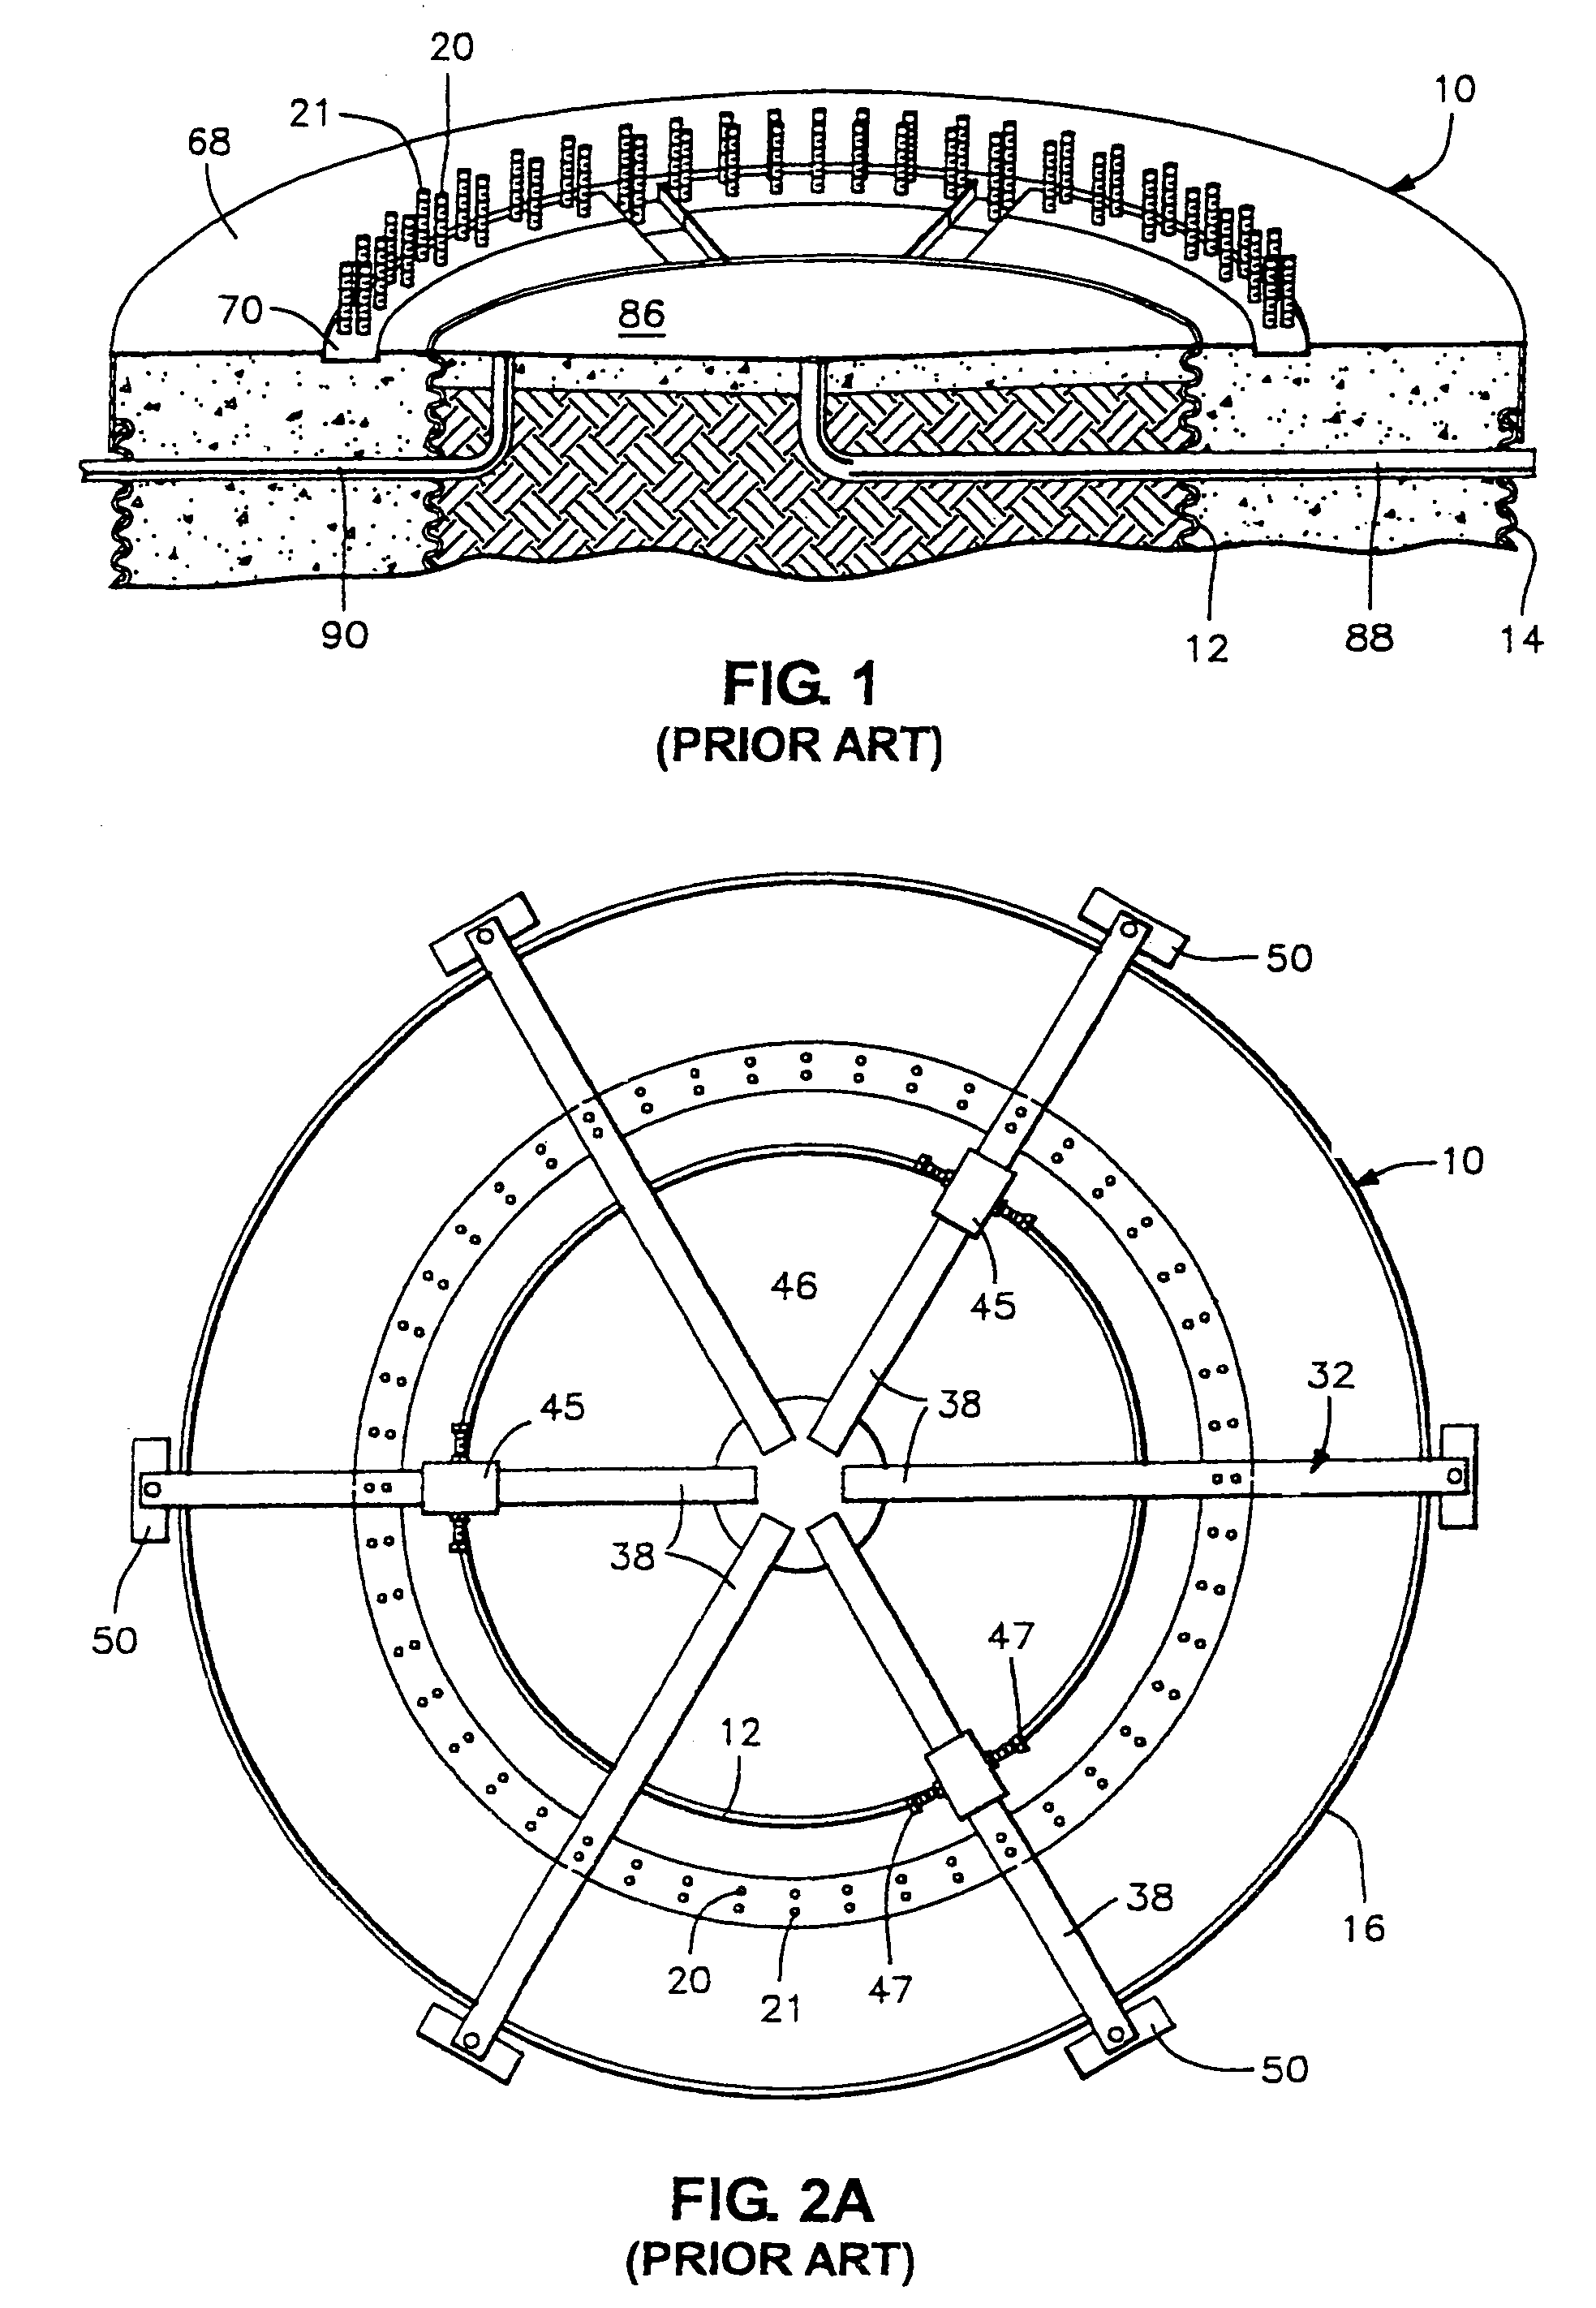 Method of forming a perimeter weighted foundation for wind turbines and the like